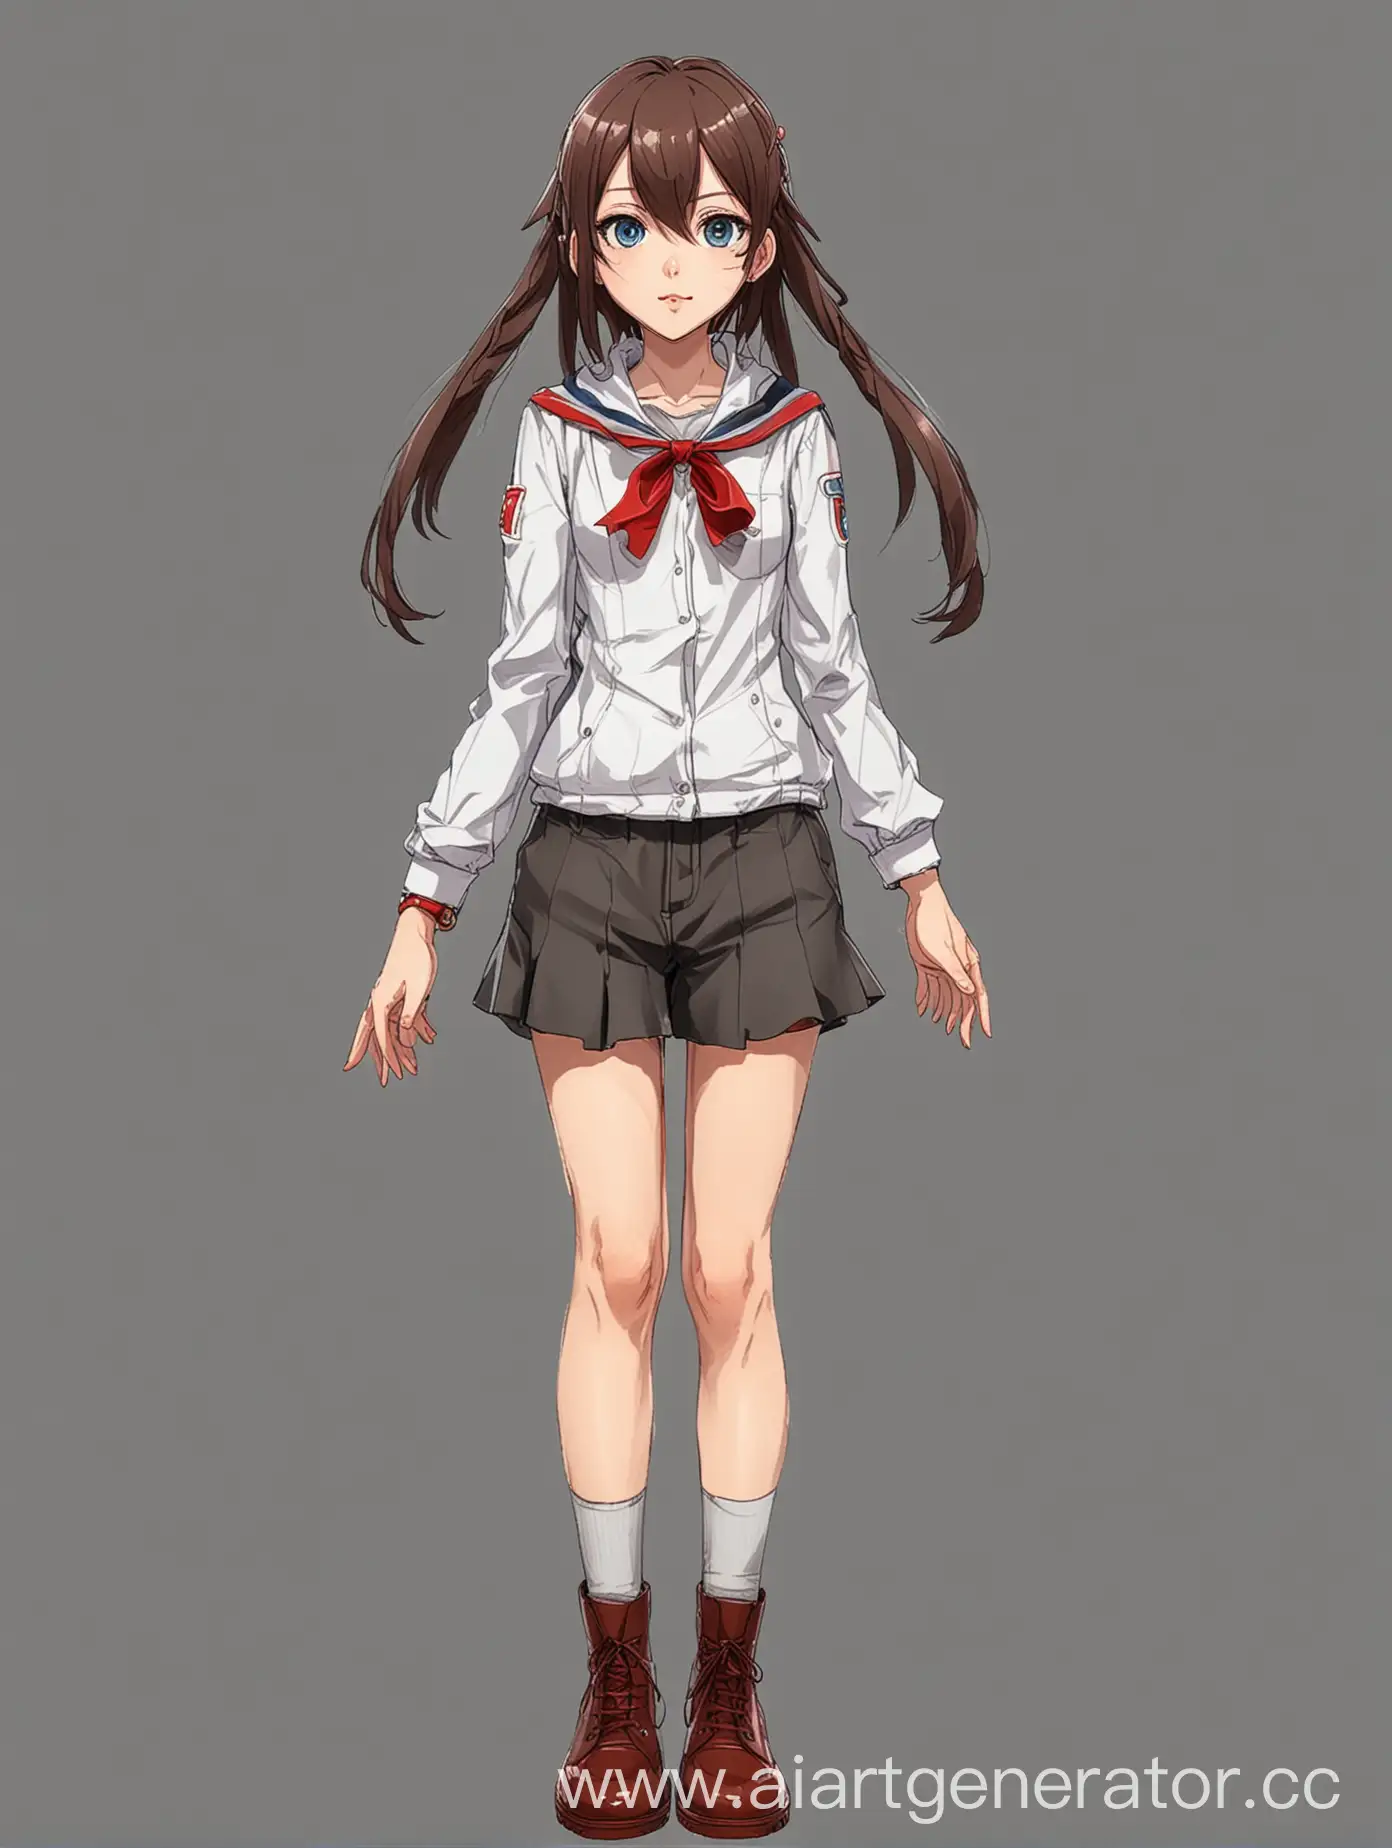 
Anime character game 2d drawing girl full height